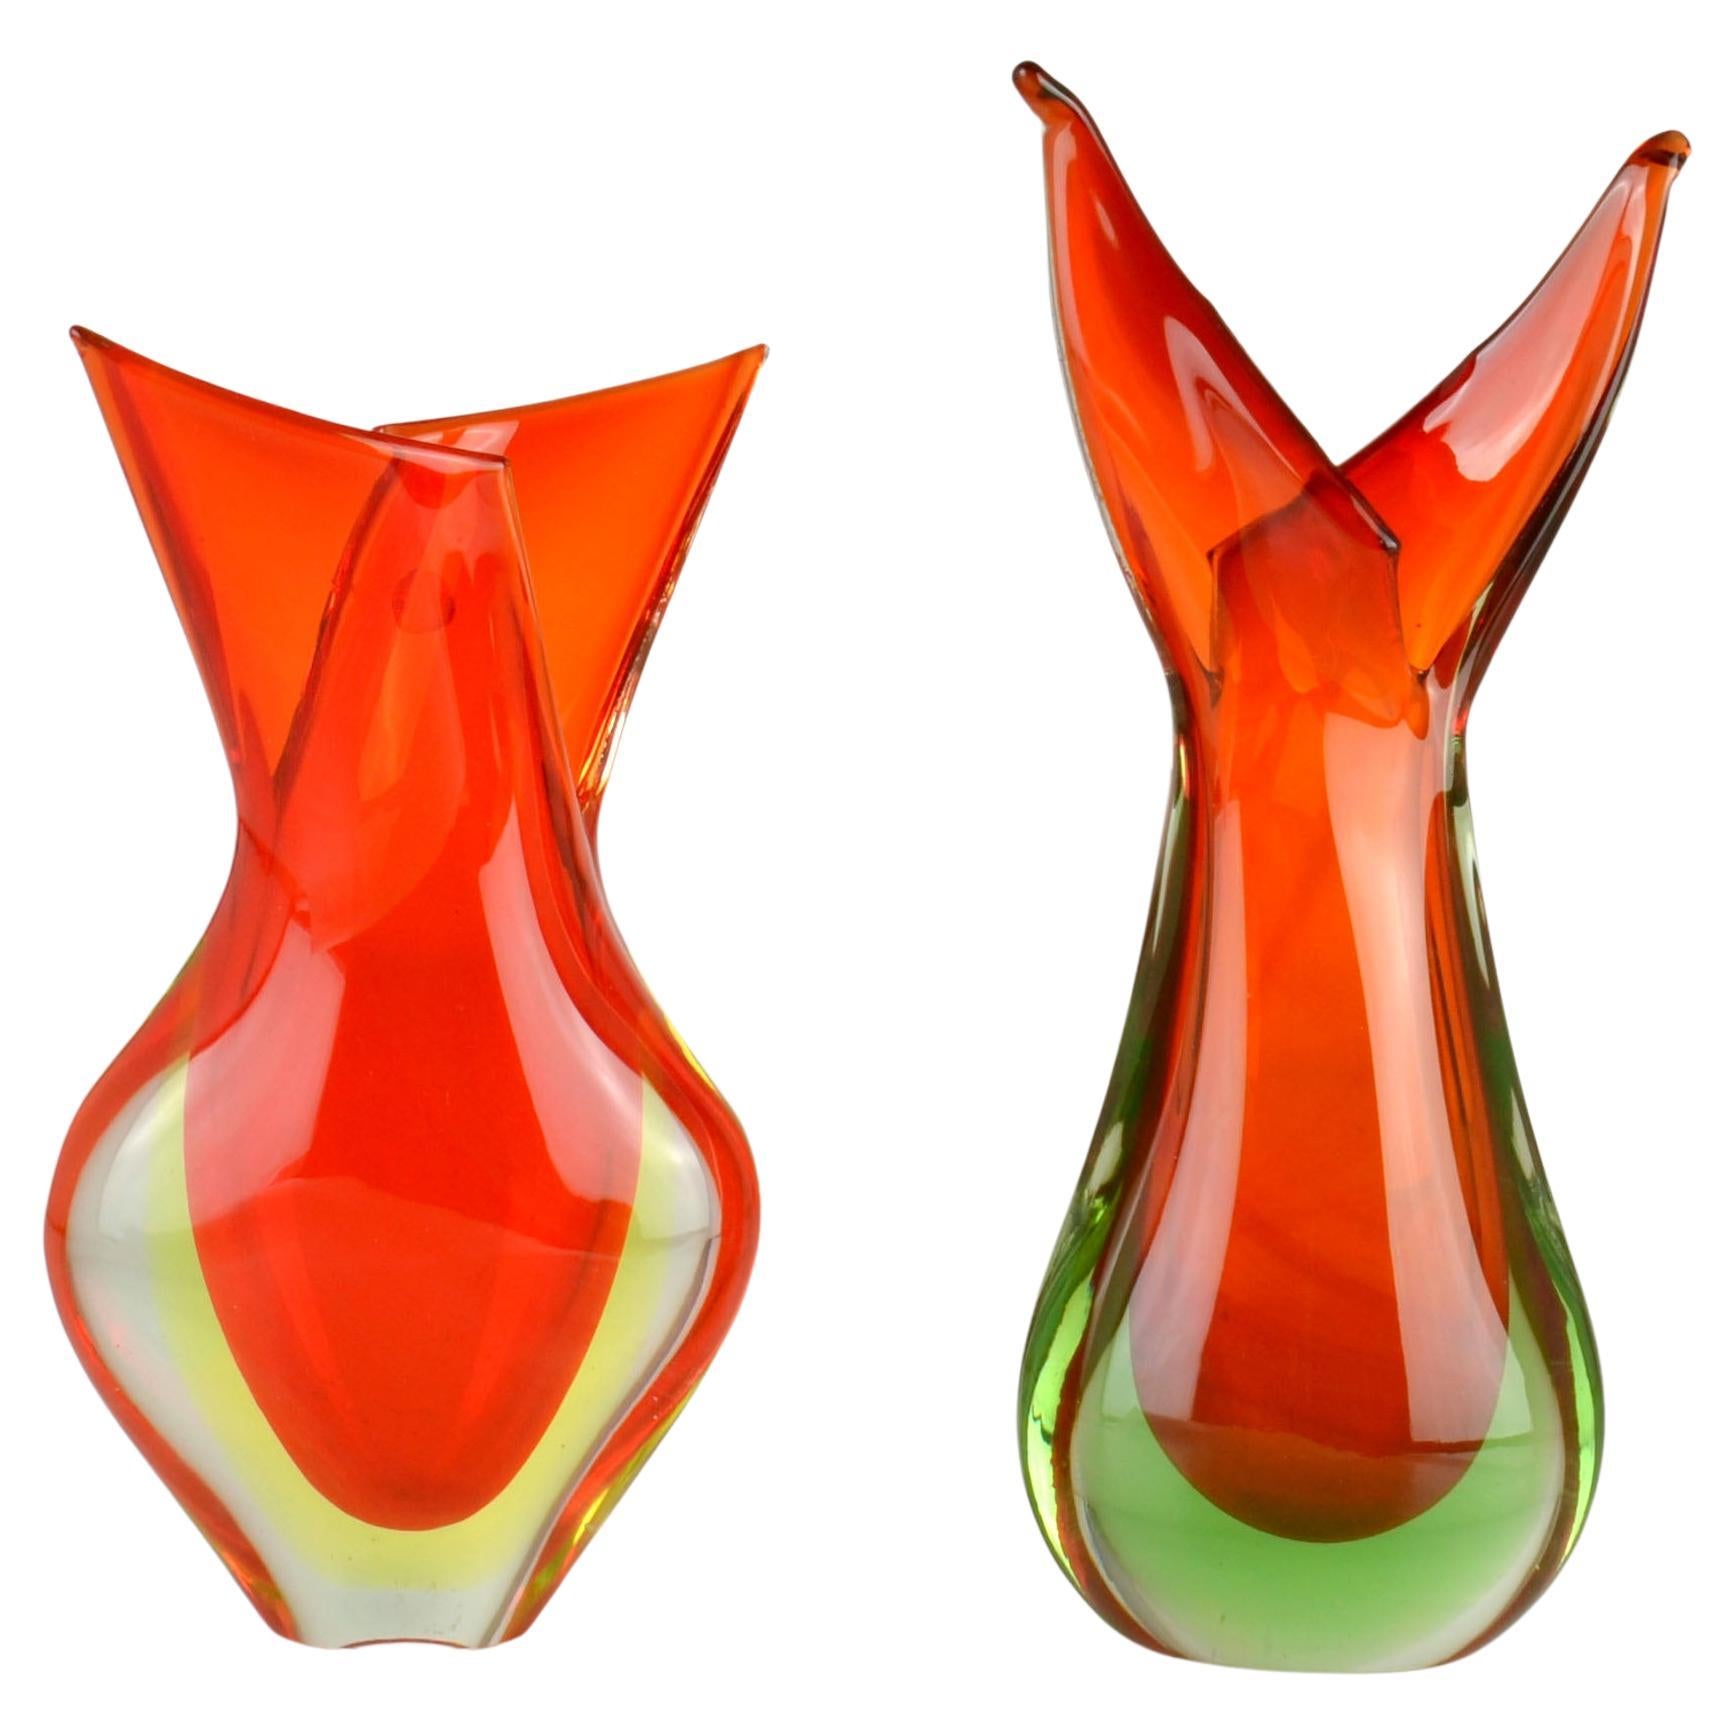 Glass vases by Flavio Poli for Seguso 1950s in fiery orange shaped like a flame.They are hand blown, known as Venetian Sommerso, made in Murano, Venice, Italy. 
The vases are a combination of orange overflowing into yellow or green glass and encased